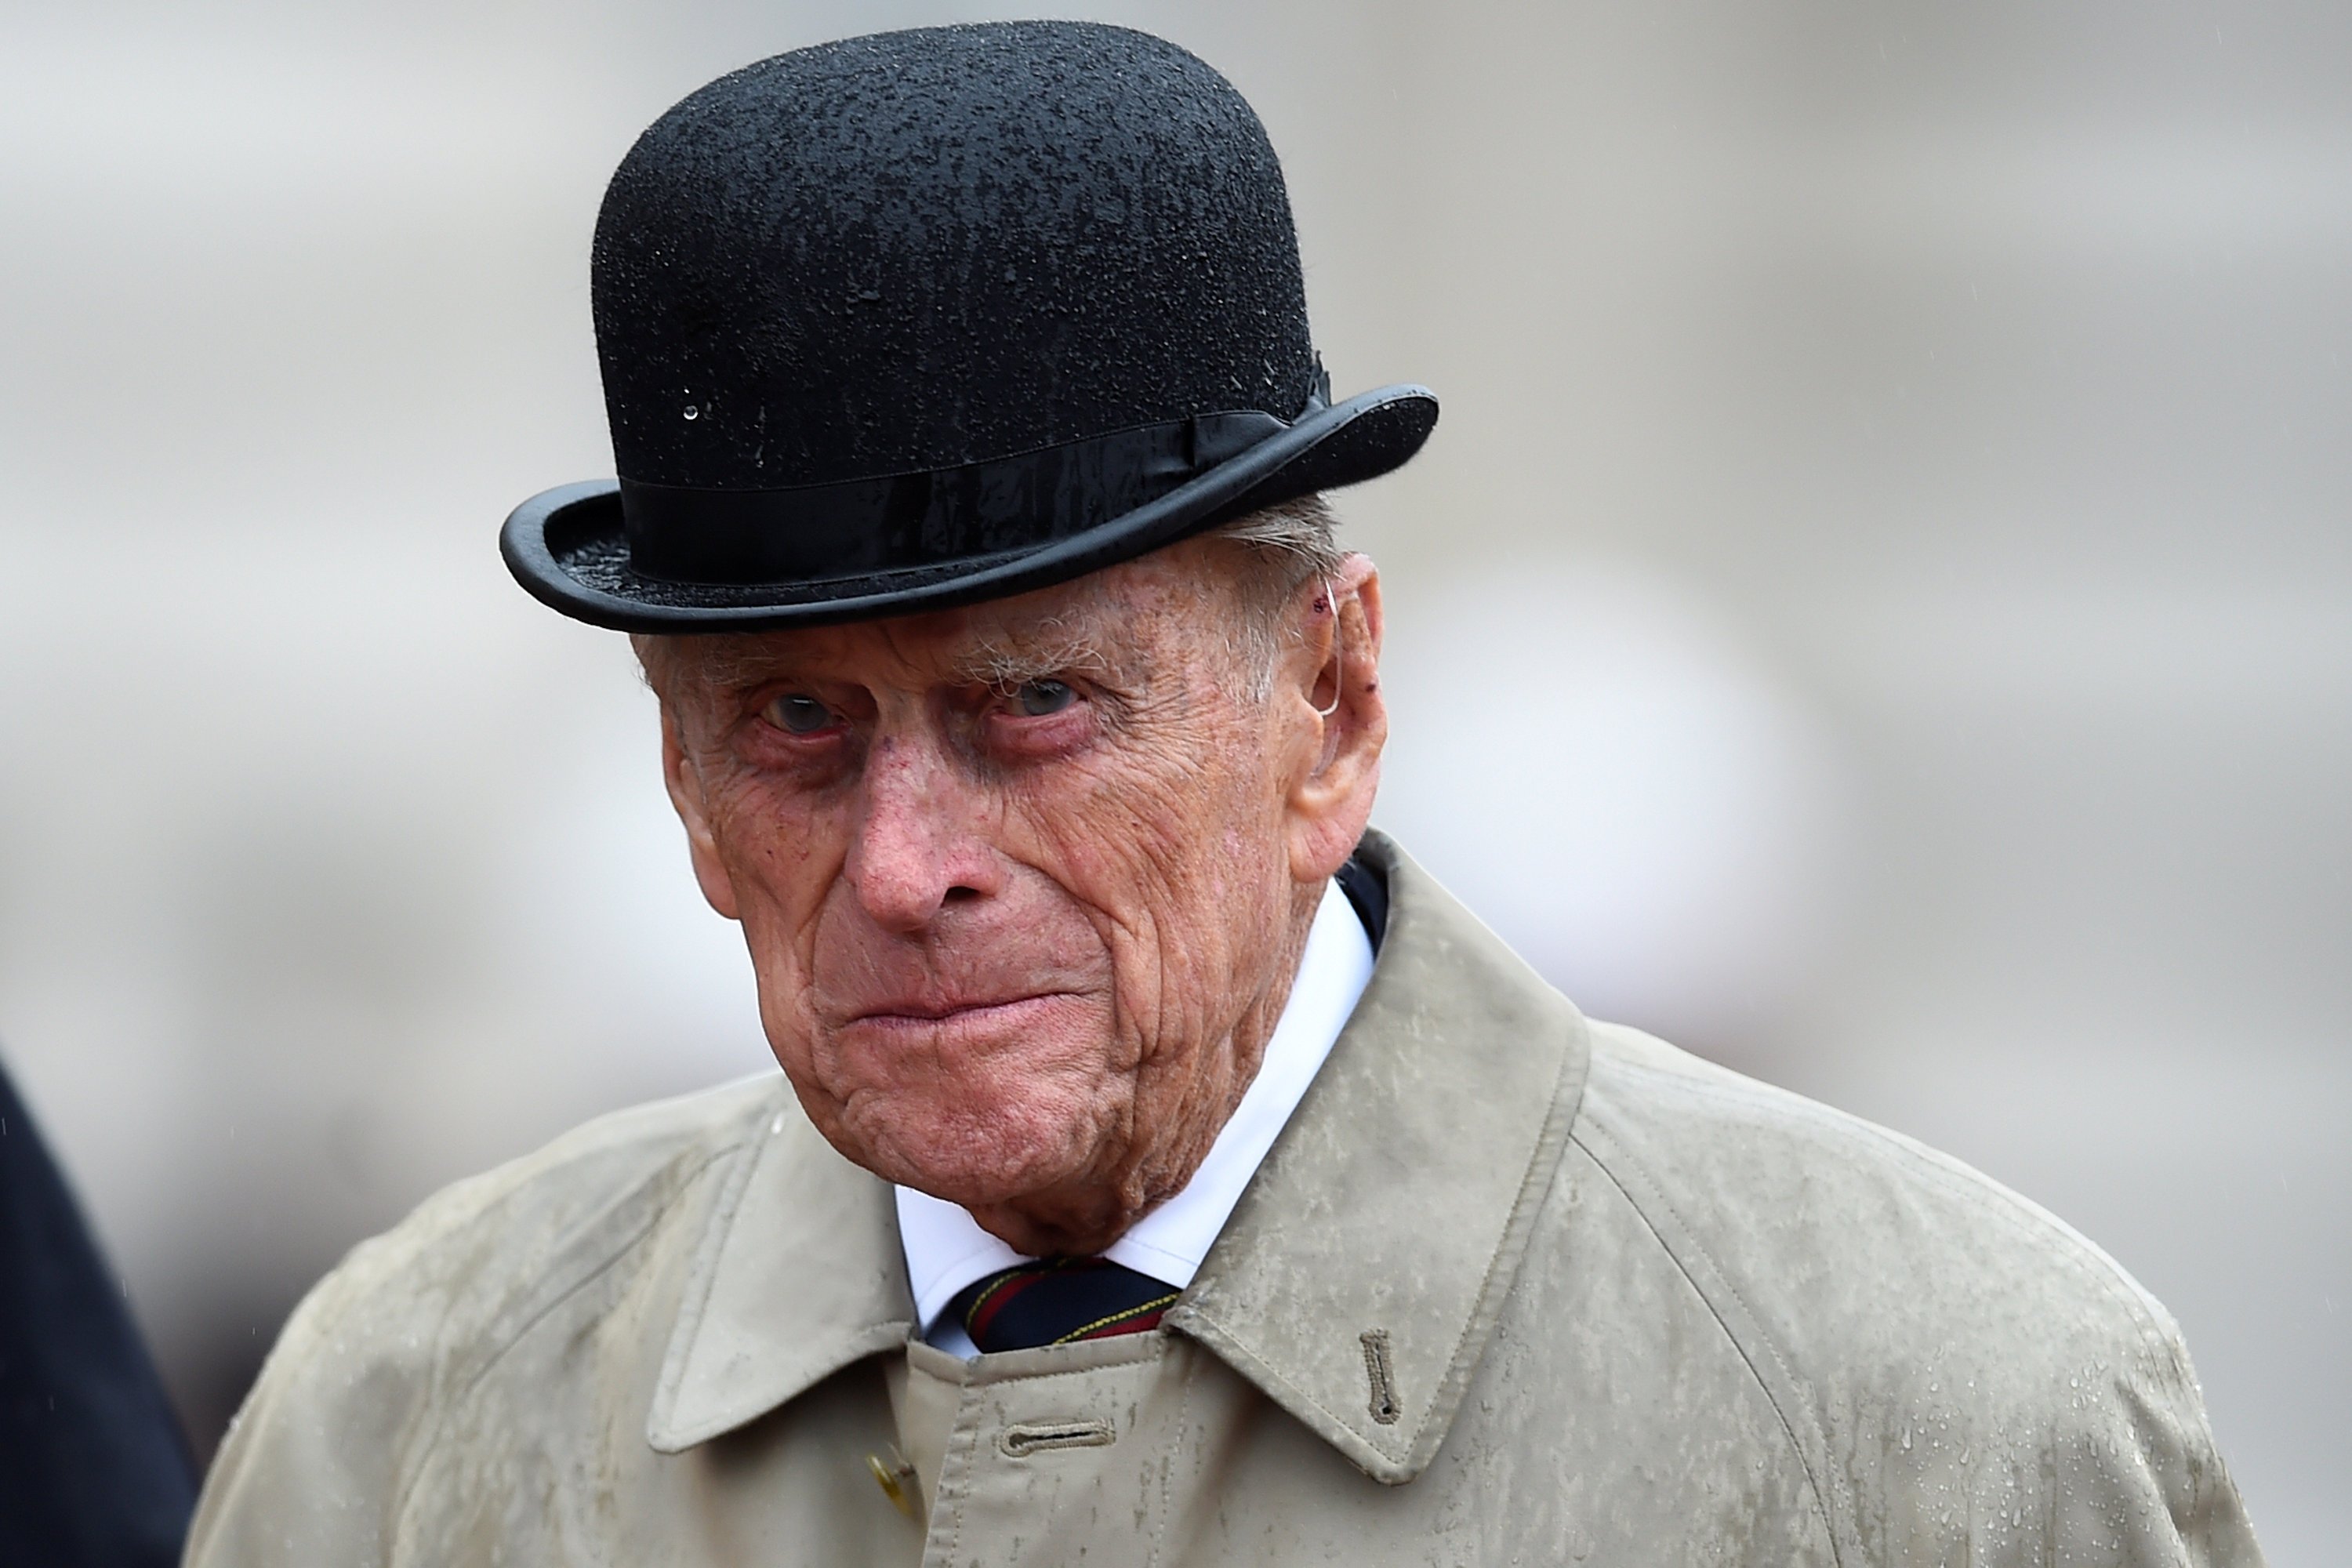 Prince Philip makes his final individual public engagement as he attends a parade to mark the finale of the 1664 Global Challenge, on the Buckingham Palace Forecourt on August 2, 2017 in London, England | Photo: Getty Images